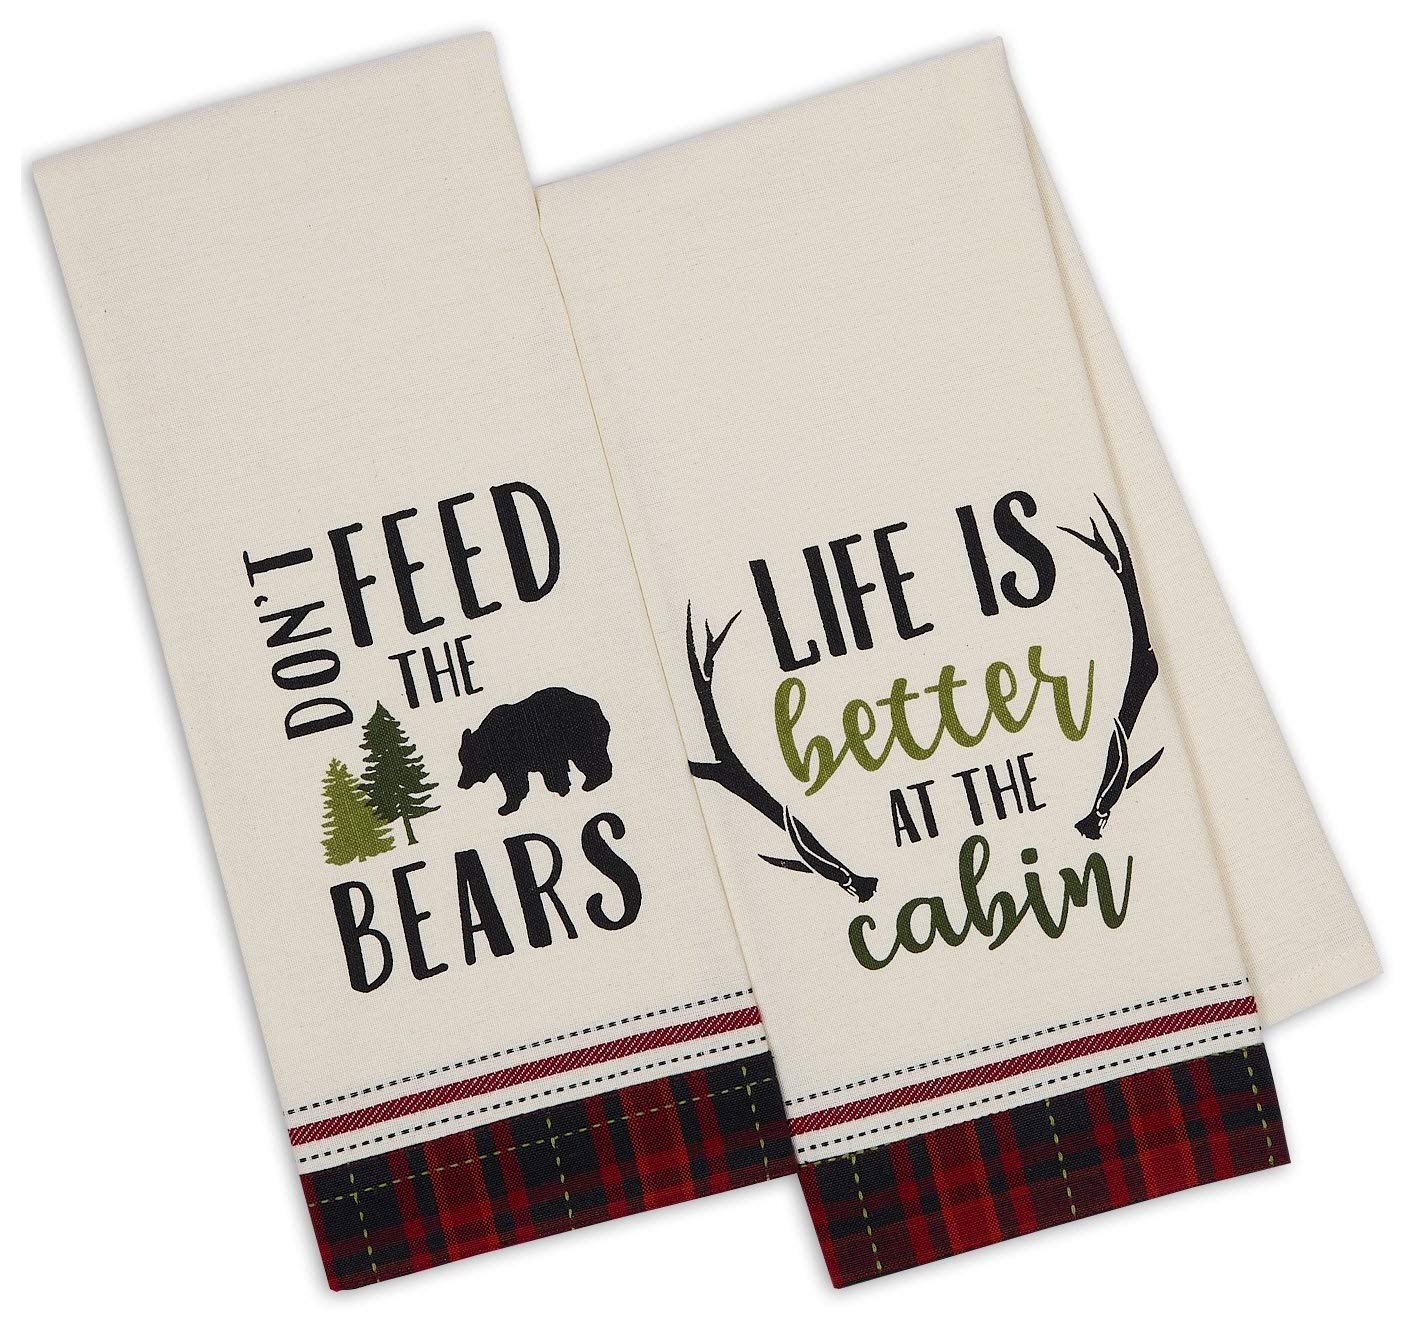 3 Cabin Lodge Themed Decorative Cotton Kitchen Towels with Bear, Antler, Deer, Moose and Paw Print | Towel Set for Dish and Hand Drying